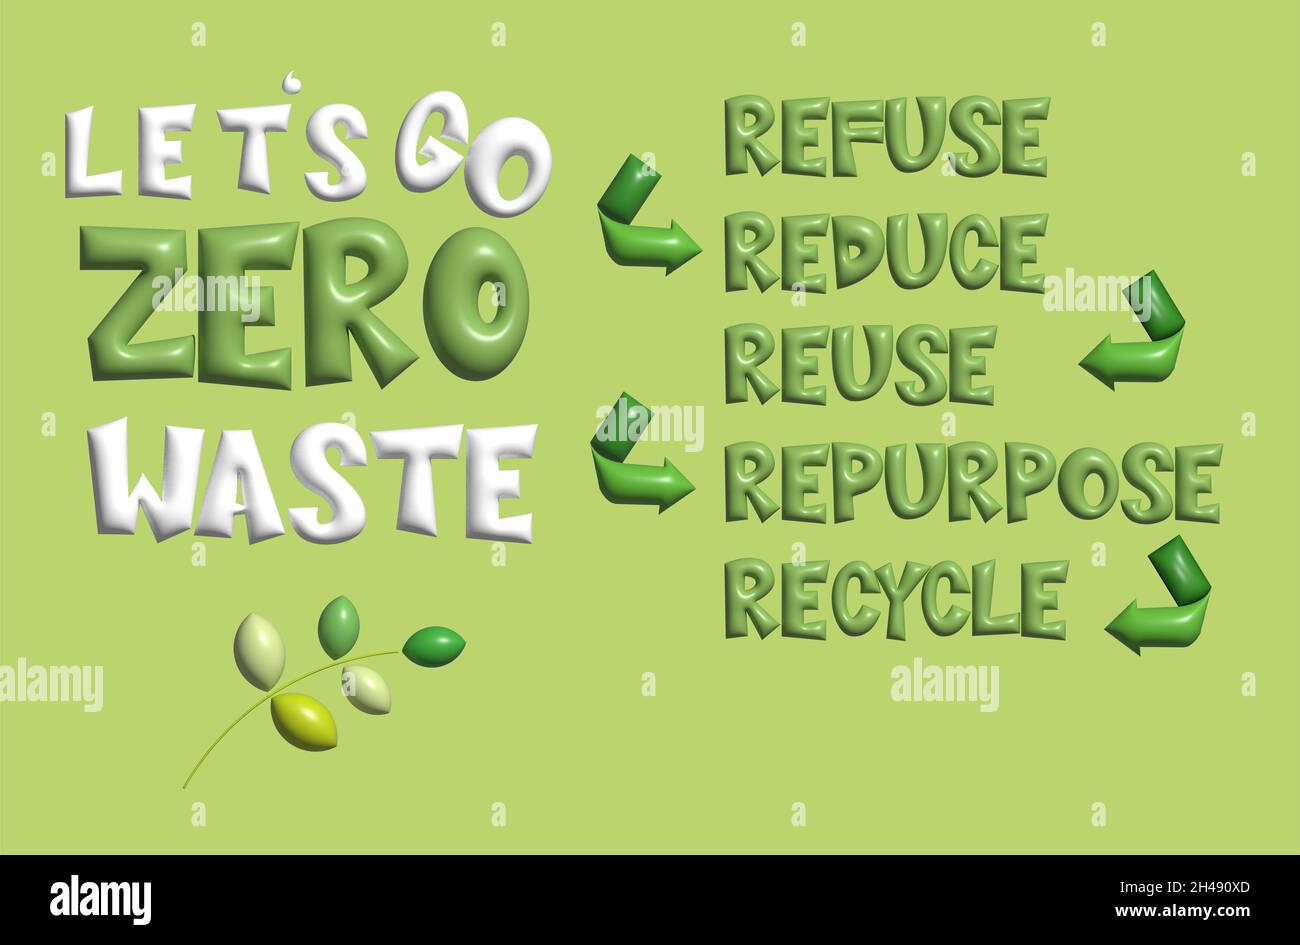 3D Zero waste concept, design for logo, sticker, poster, printing ads say 'Let's go Zero waste Refuse, Reduce, Reuse, Repurpose, Recycle. Campaign Stock Photo